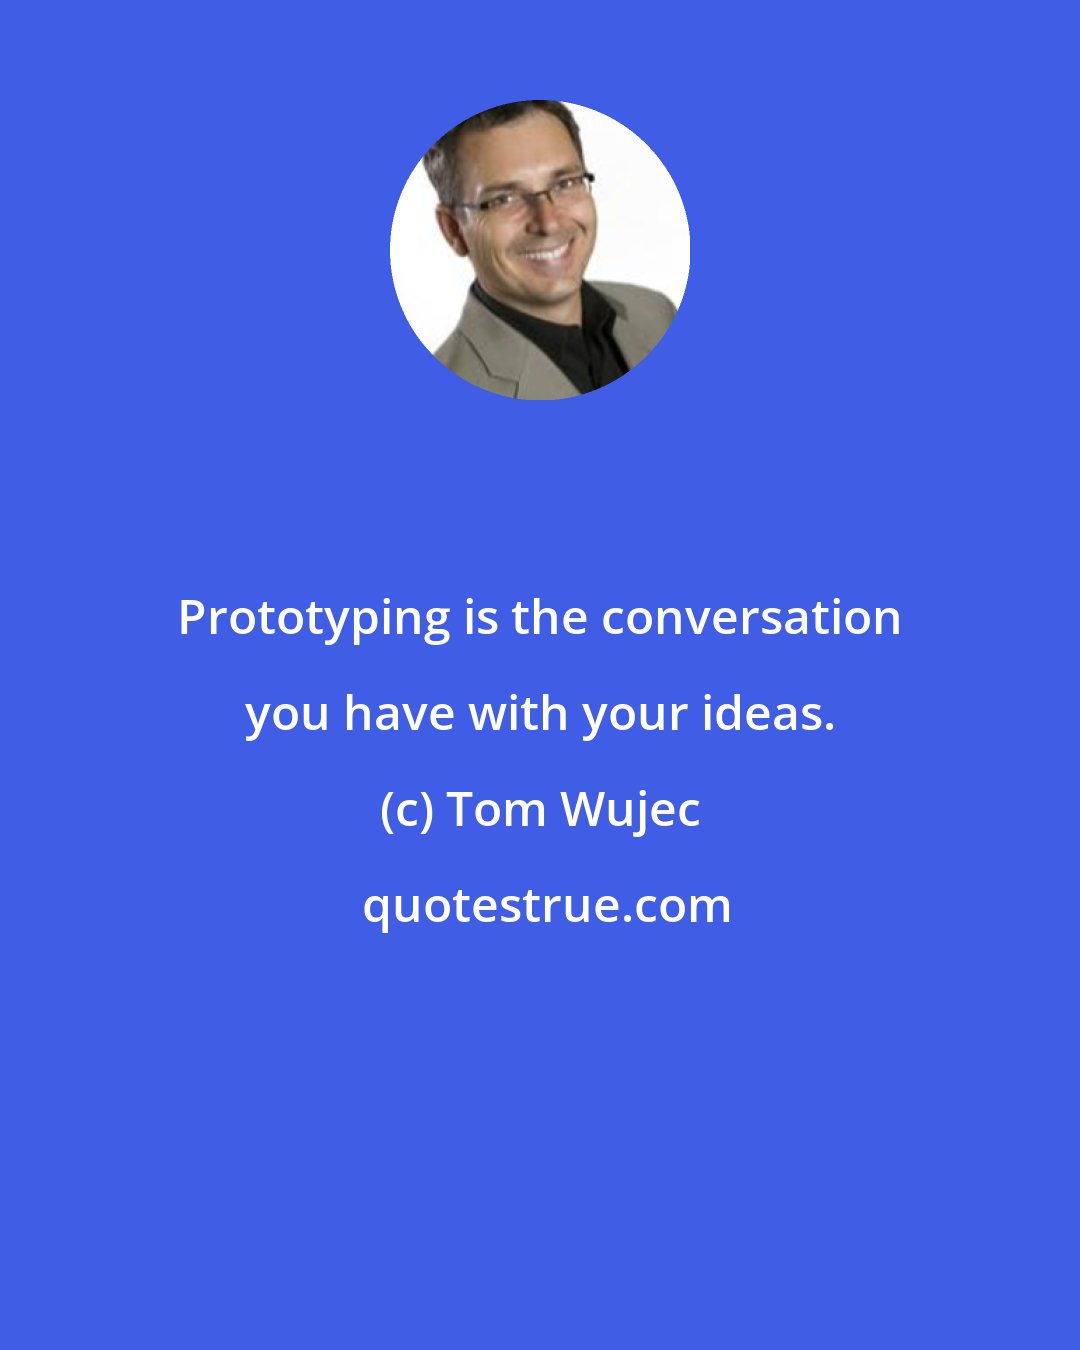 Tom Wujec: Prototyping is the conversation you have with your ideas.